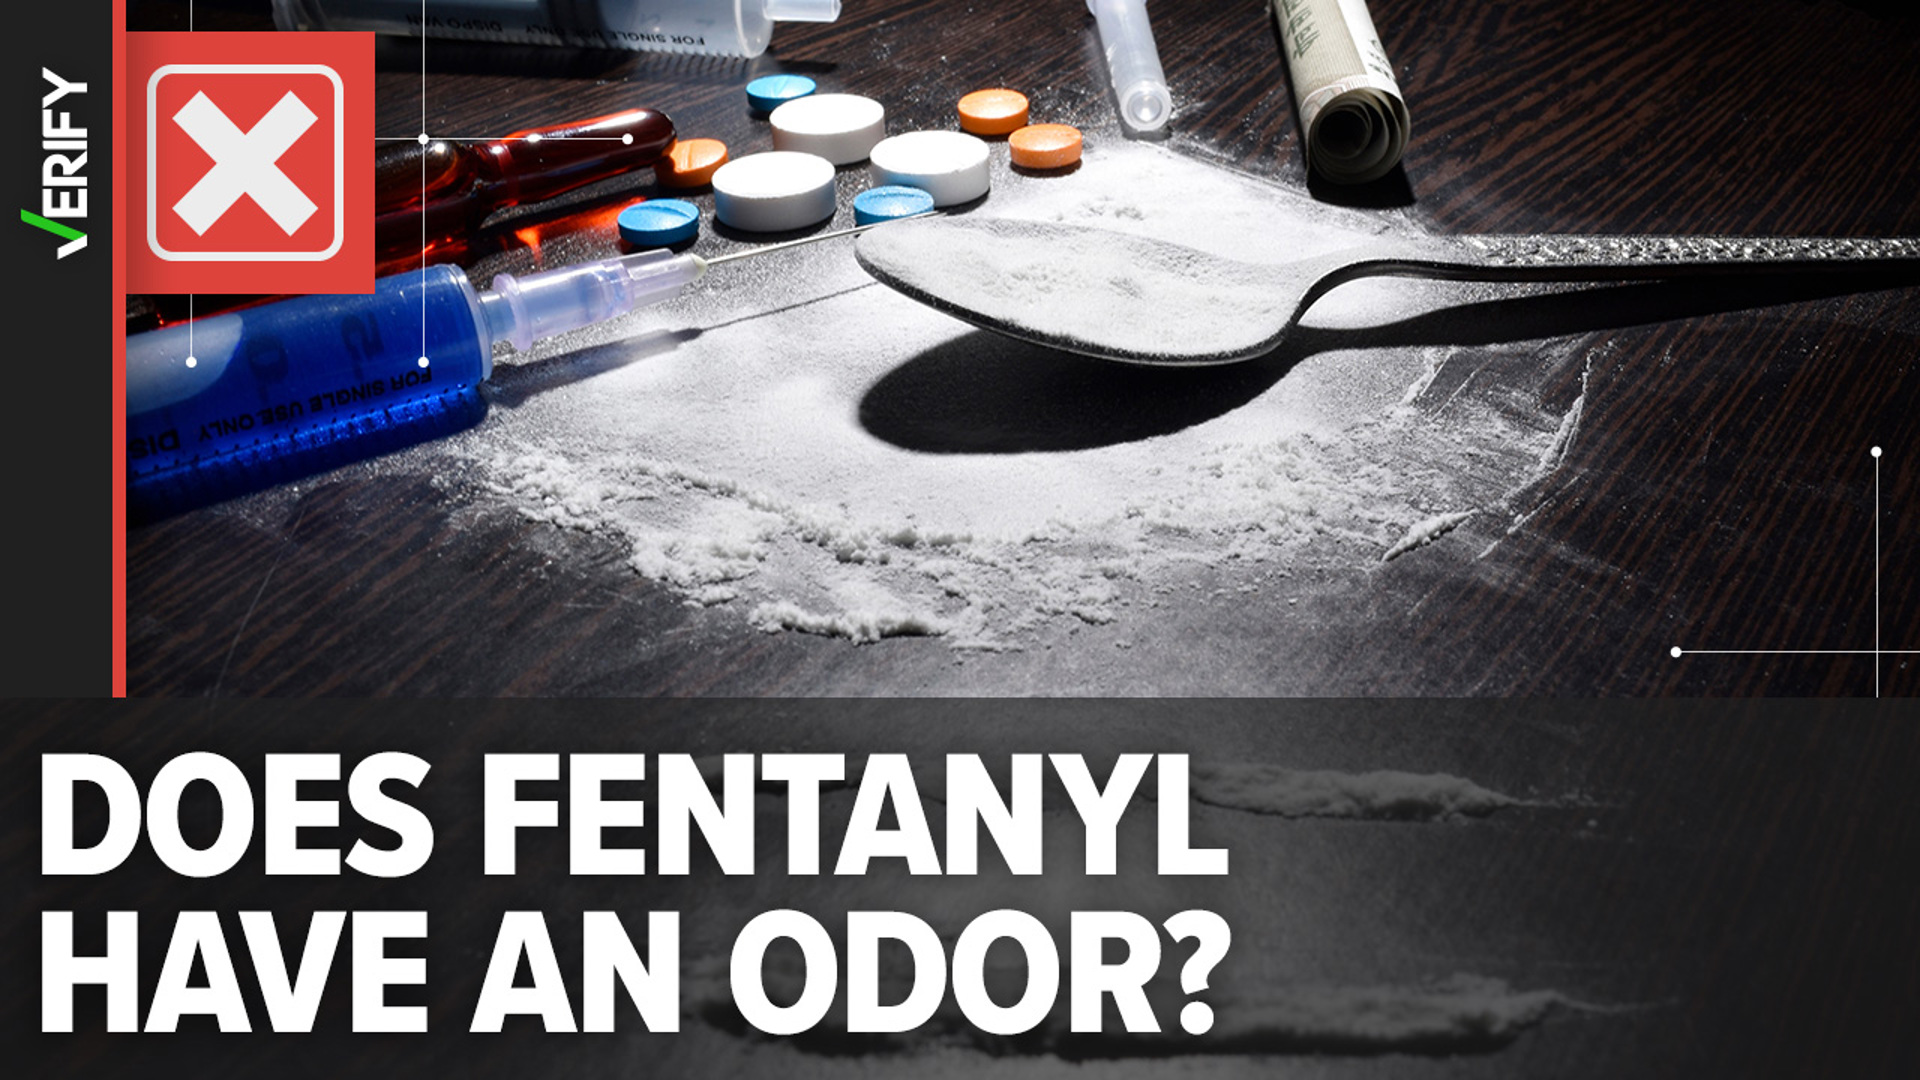 Fentanyl in any form is odorless. That makes it more difficult to detect and more dangerous, experts tell VERIFY.